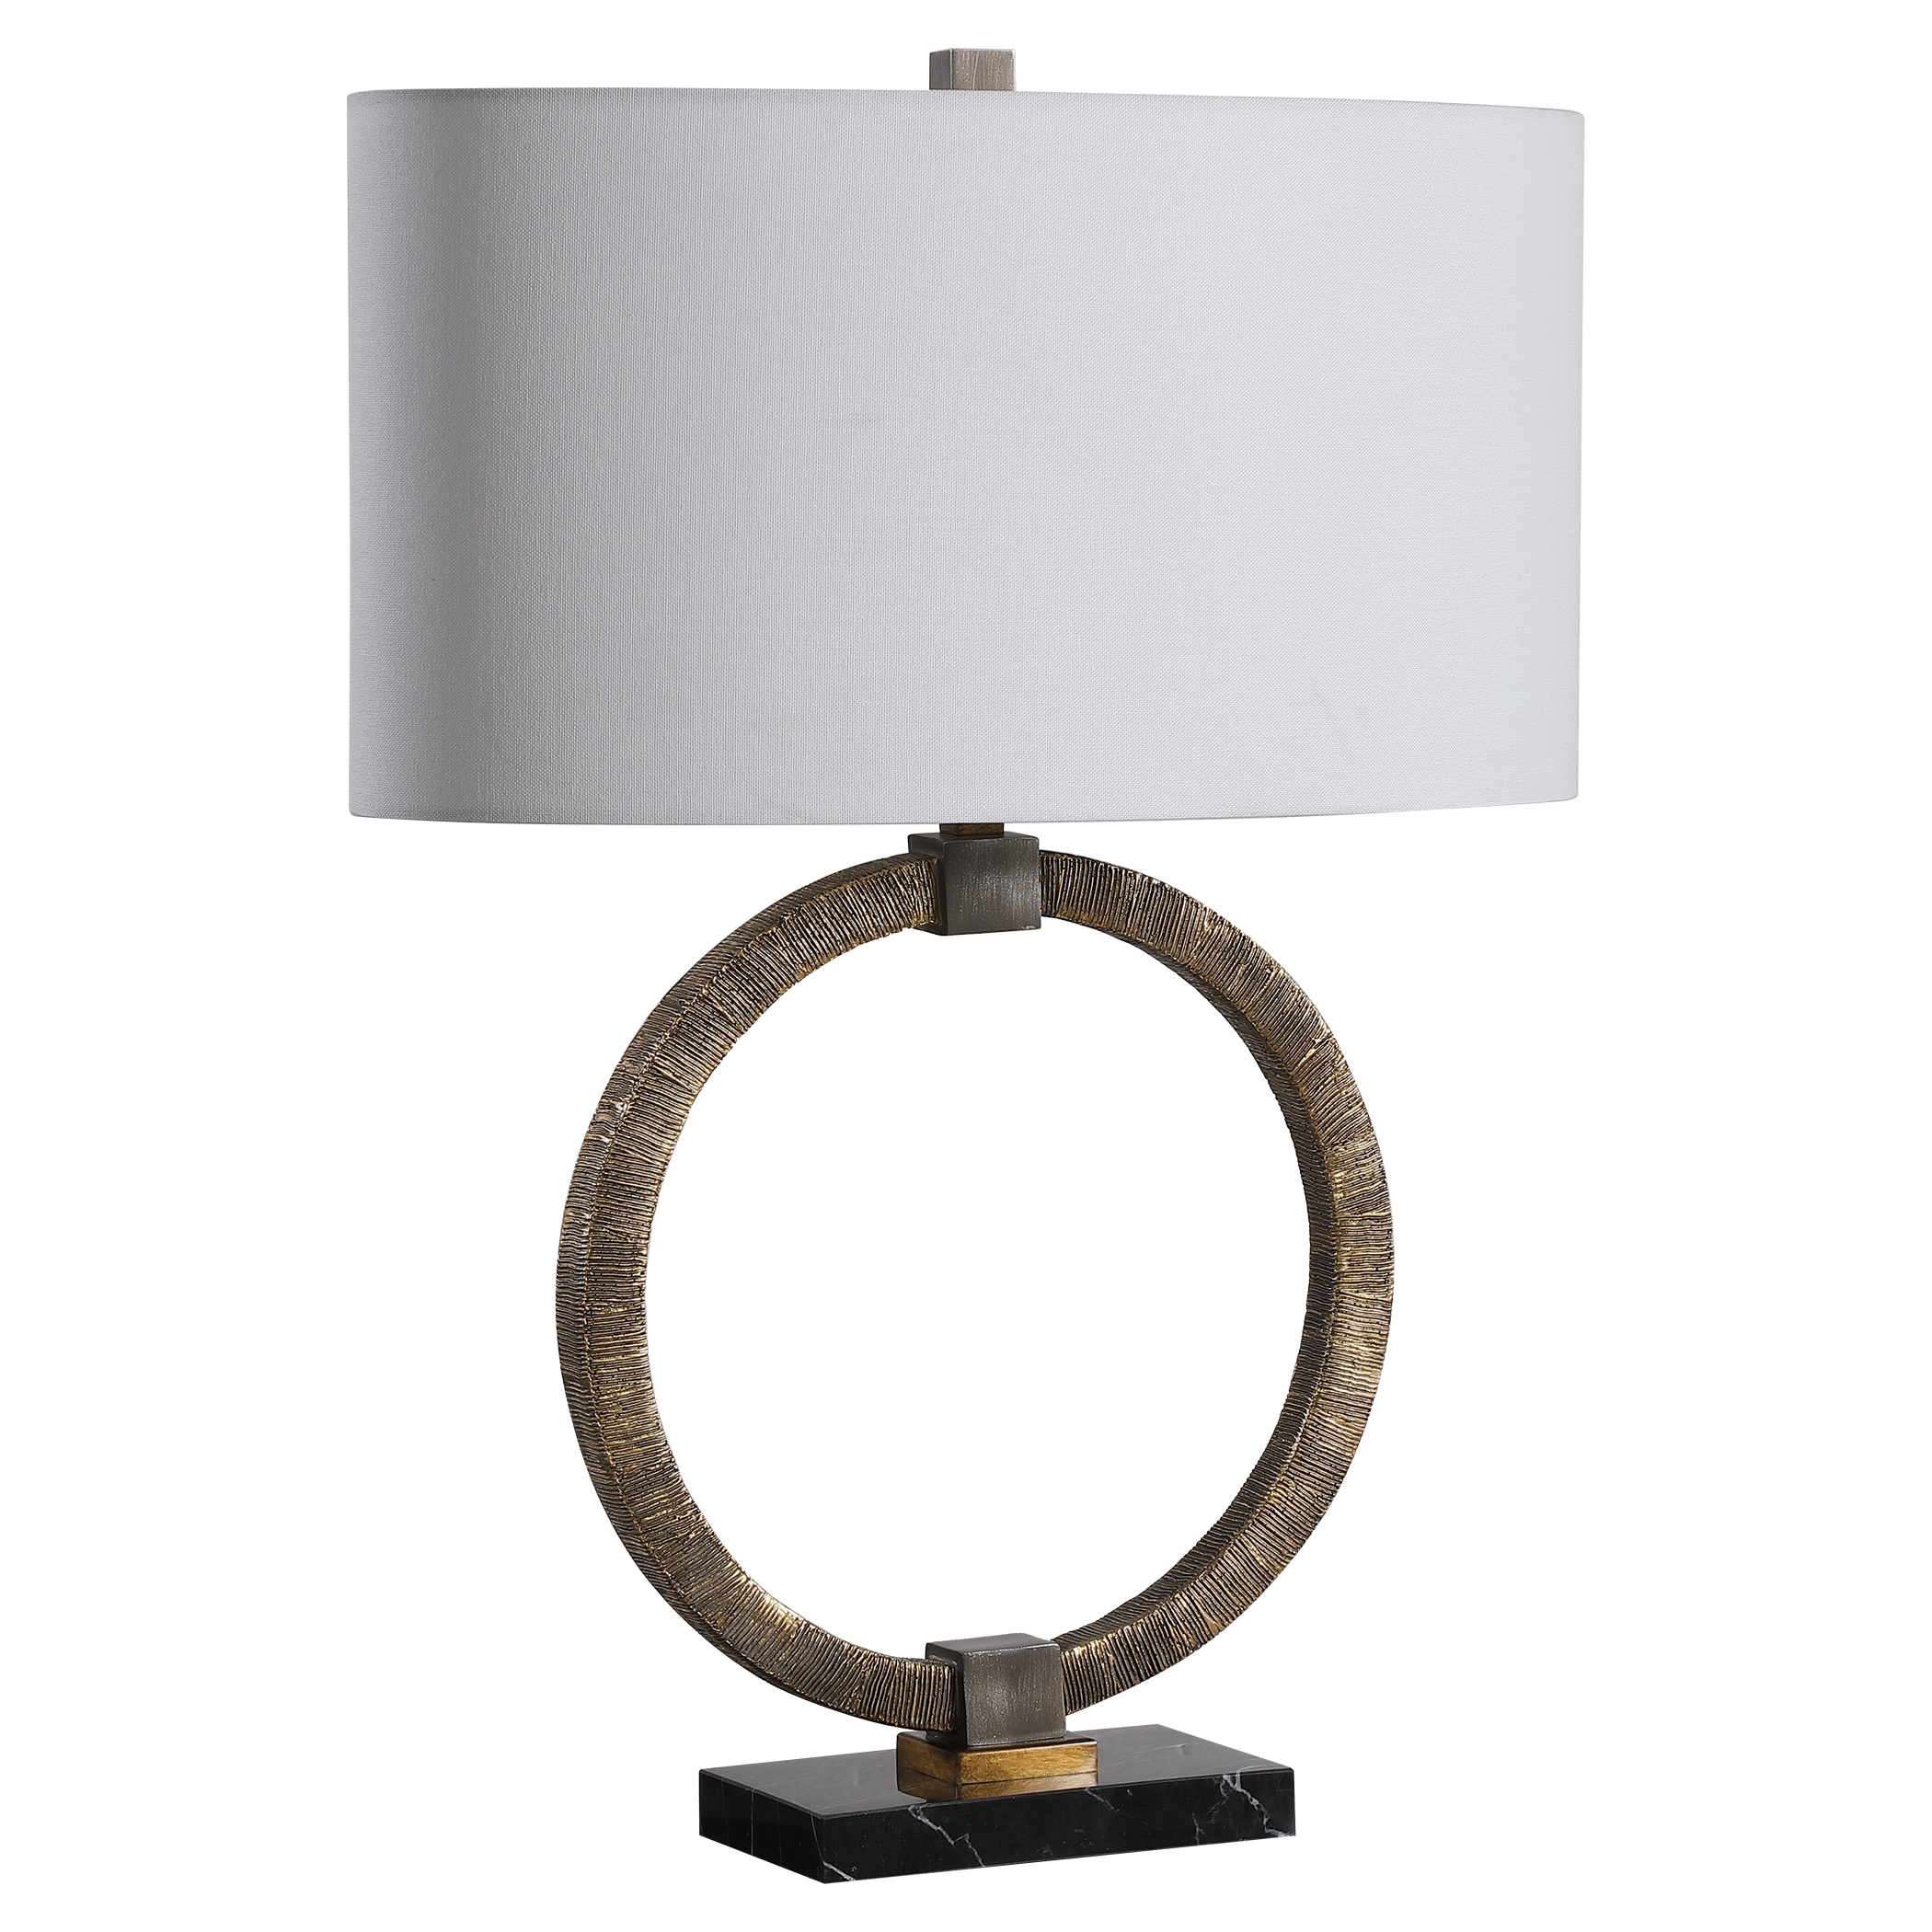 Relic Aged Gold Table Lamp - Image 2